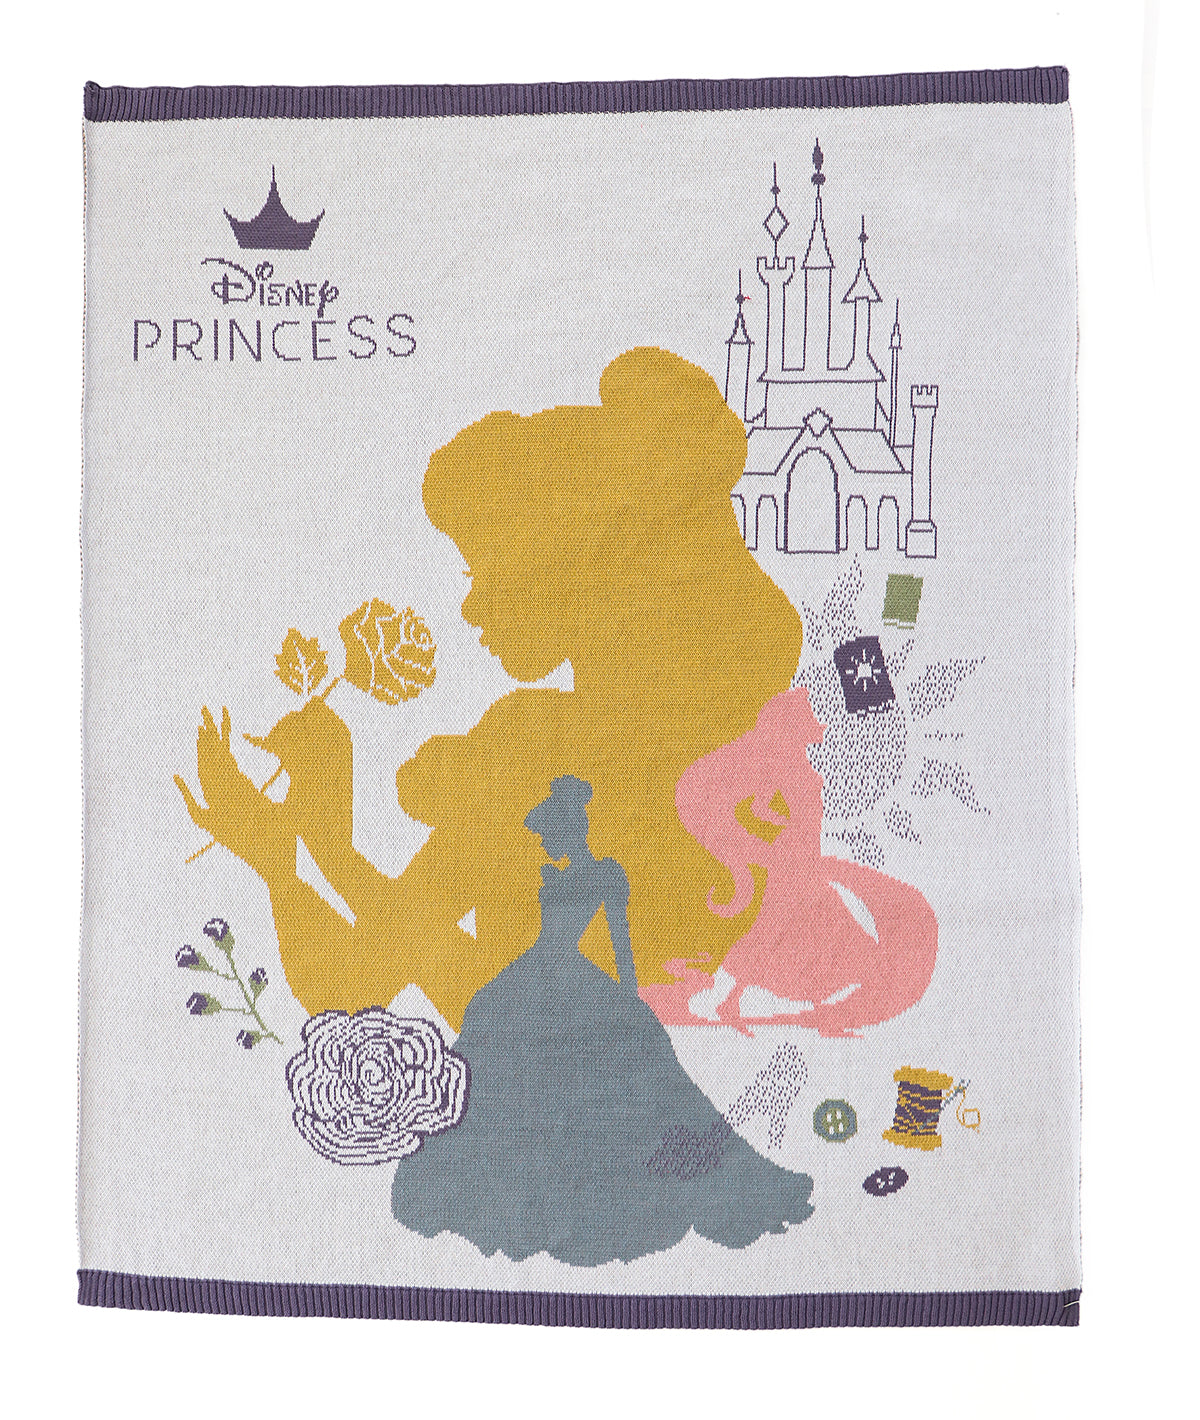 Disney Princess Frozen Cotton Knitted Ac Blanket For Baby / Infant / New Born For Use In All Seasons